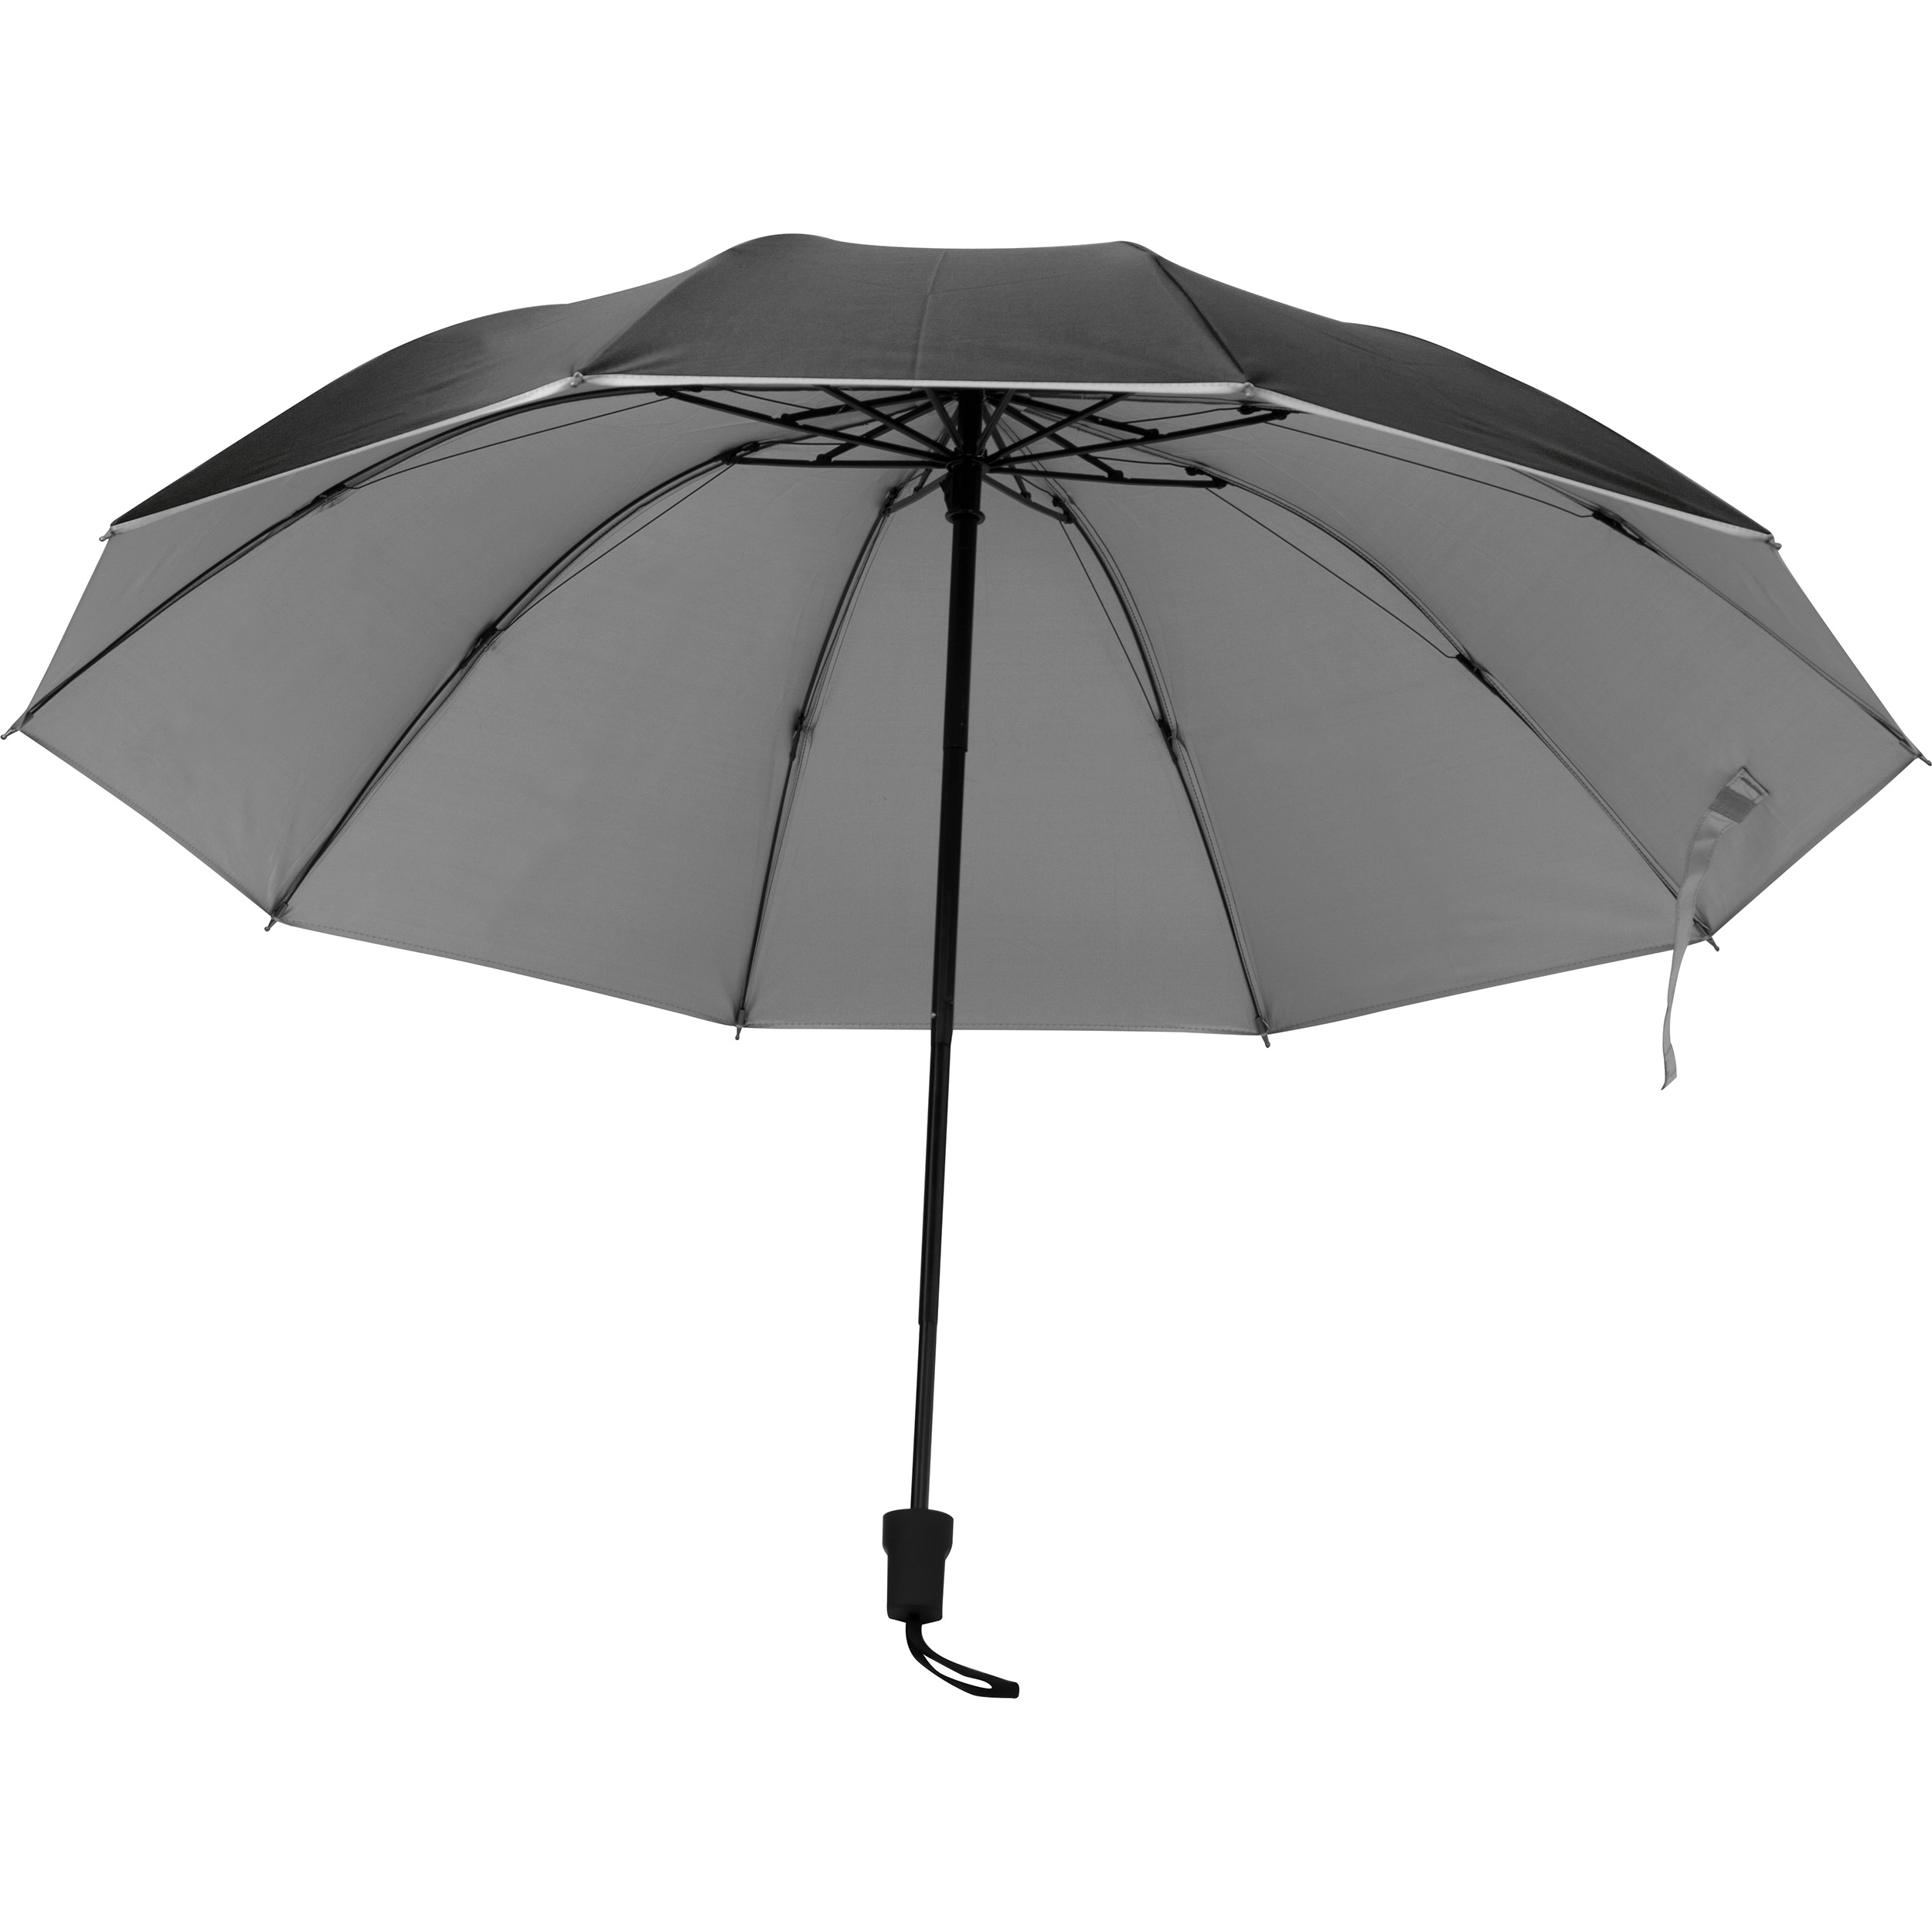 Aberford umbrella made of Pongee material, featuring a printed logo - Fochabers